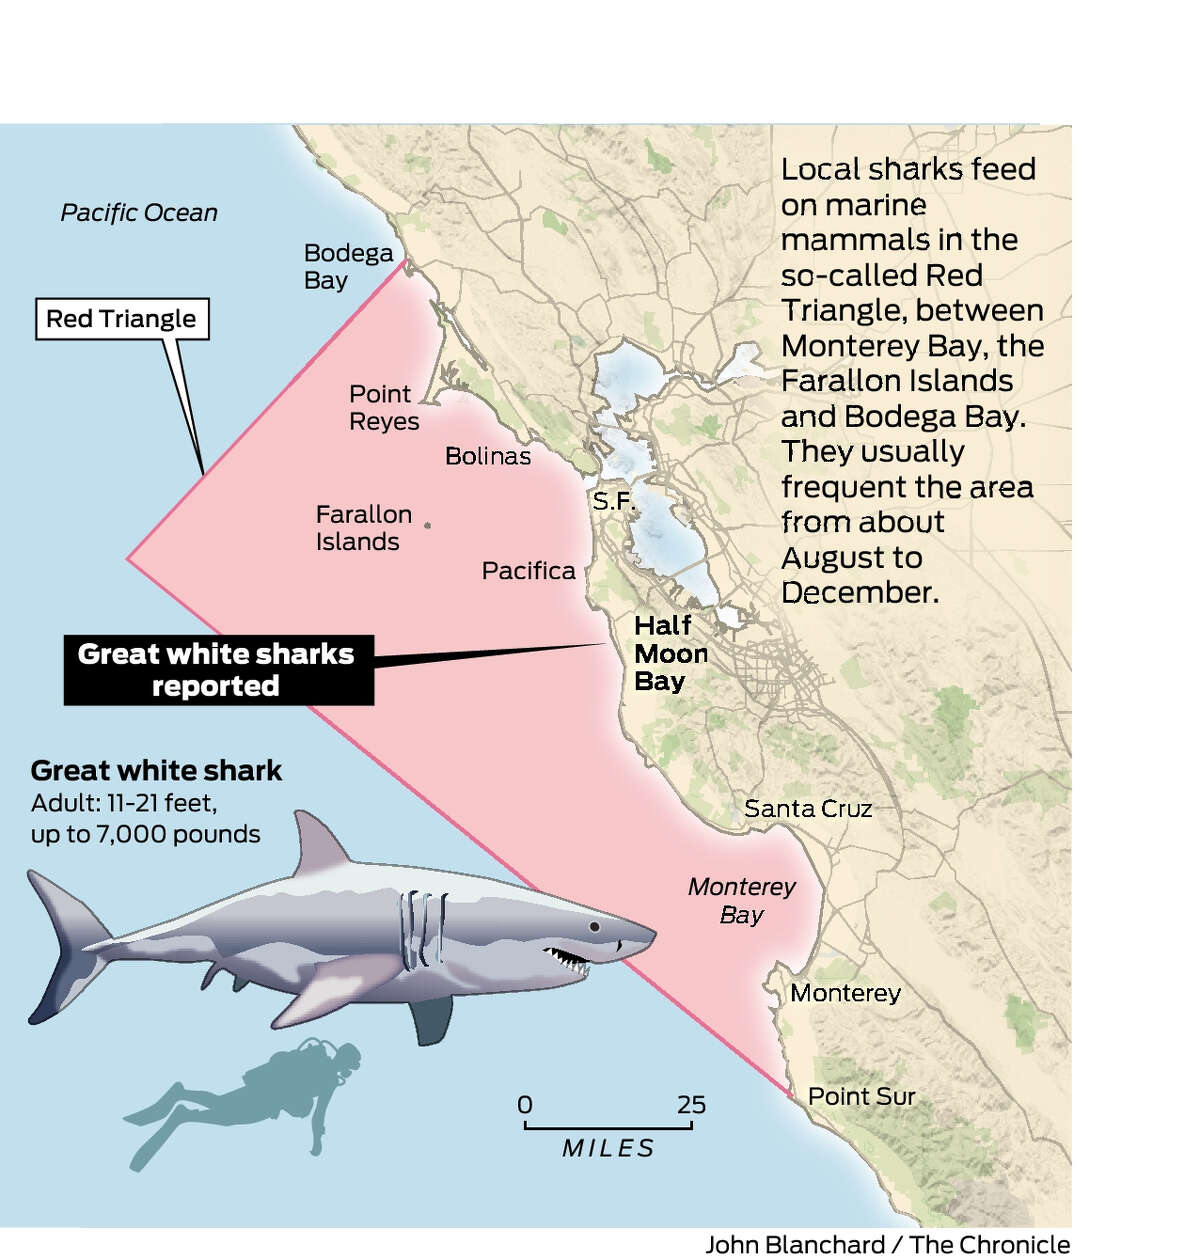 Great white sharks spotted near Half Moon Bay